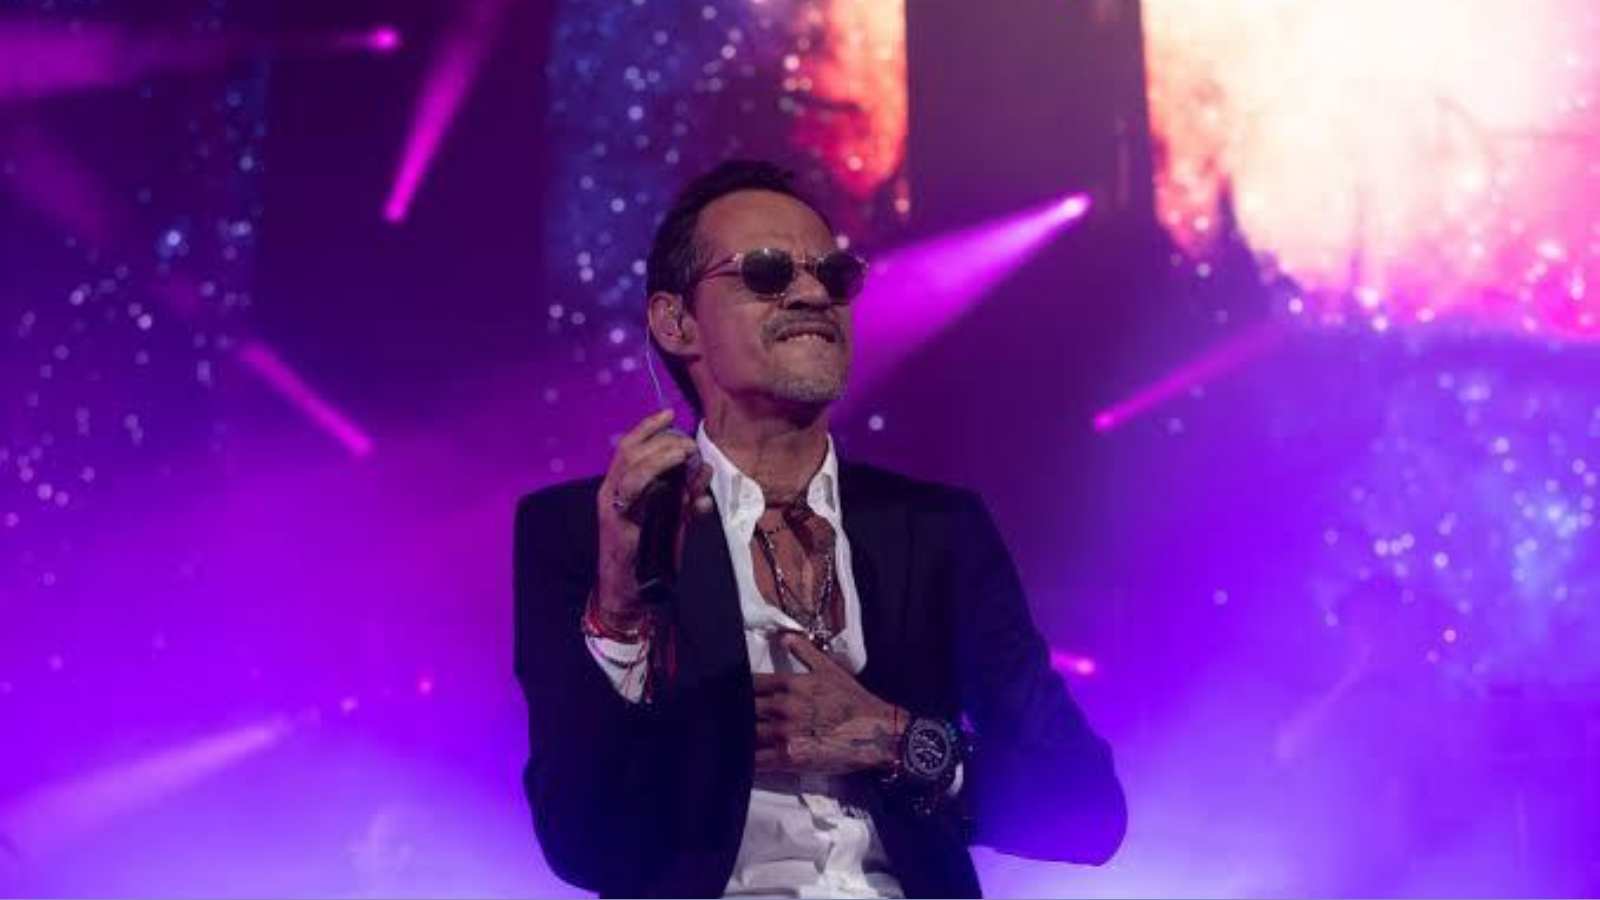 Marc Anthony cancelled his Pa’lla Voy Panama show after sustaining back injuries